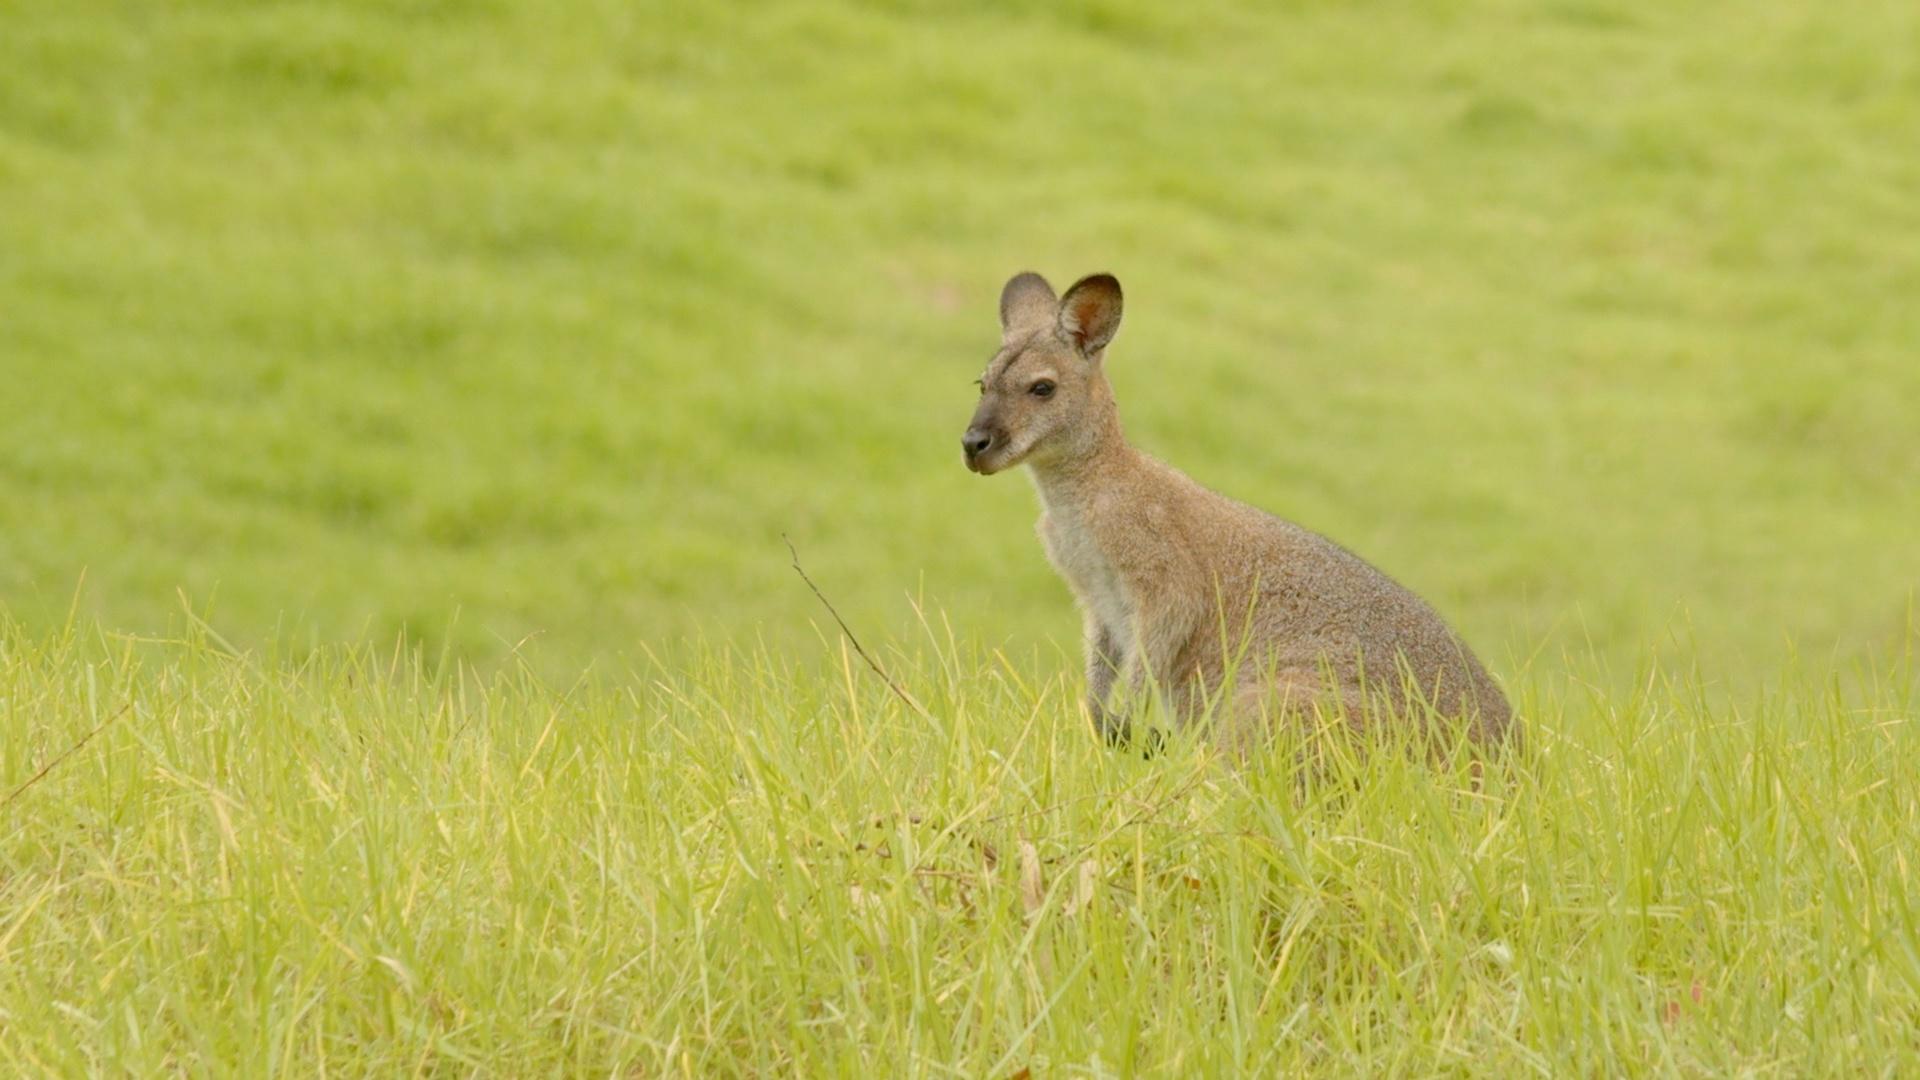 A kangaroo stops and waits in the middle of a bright, grassy field.